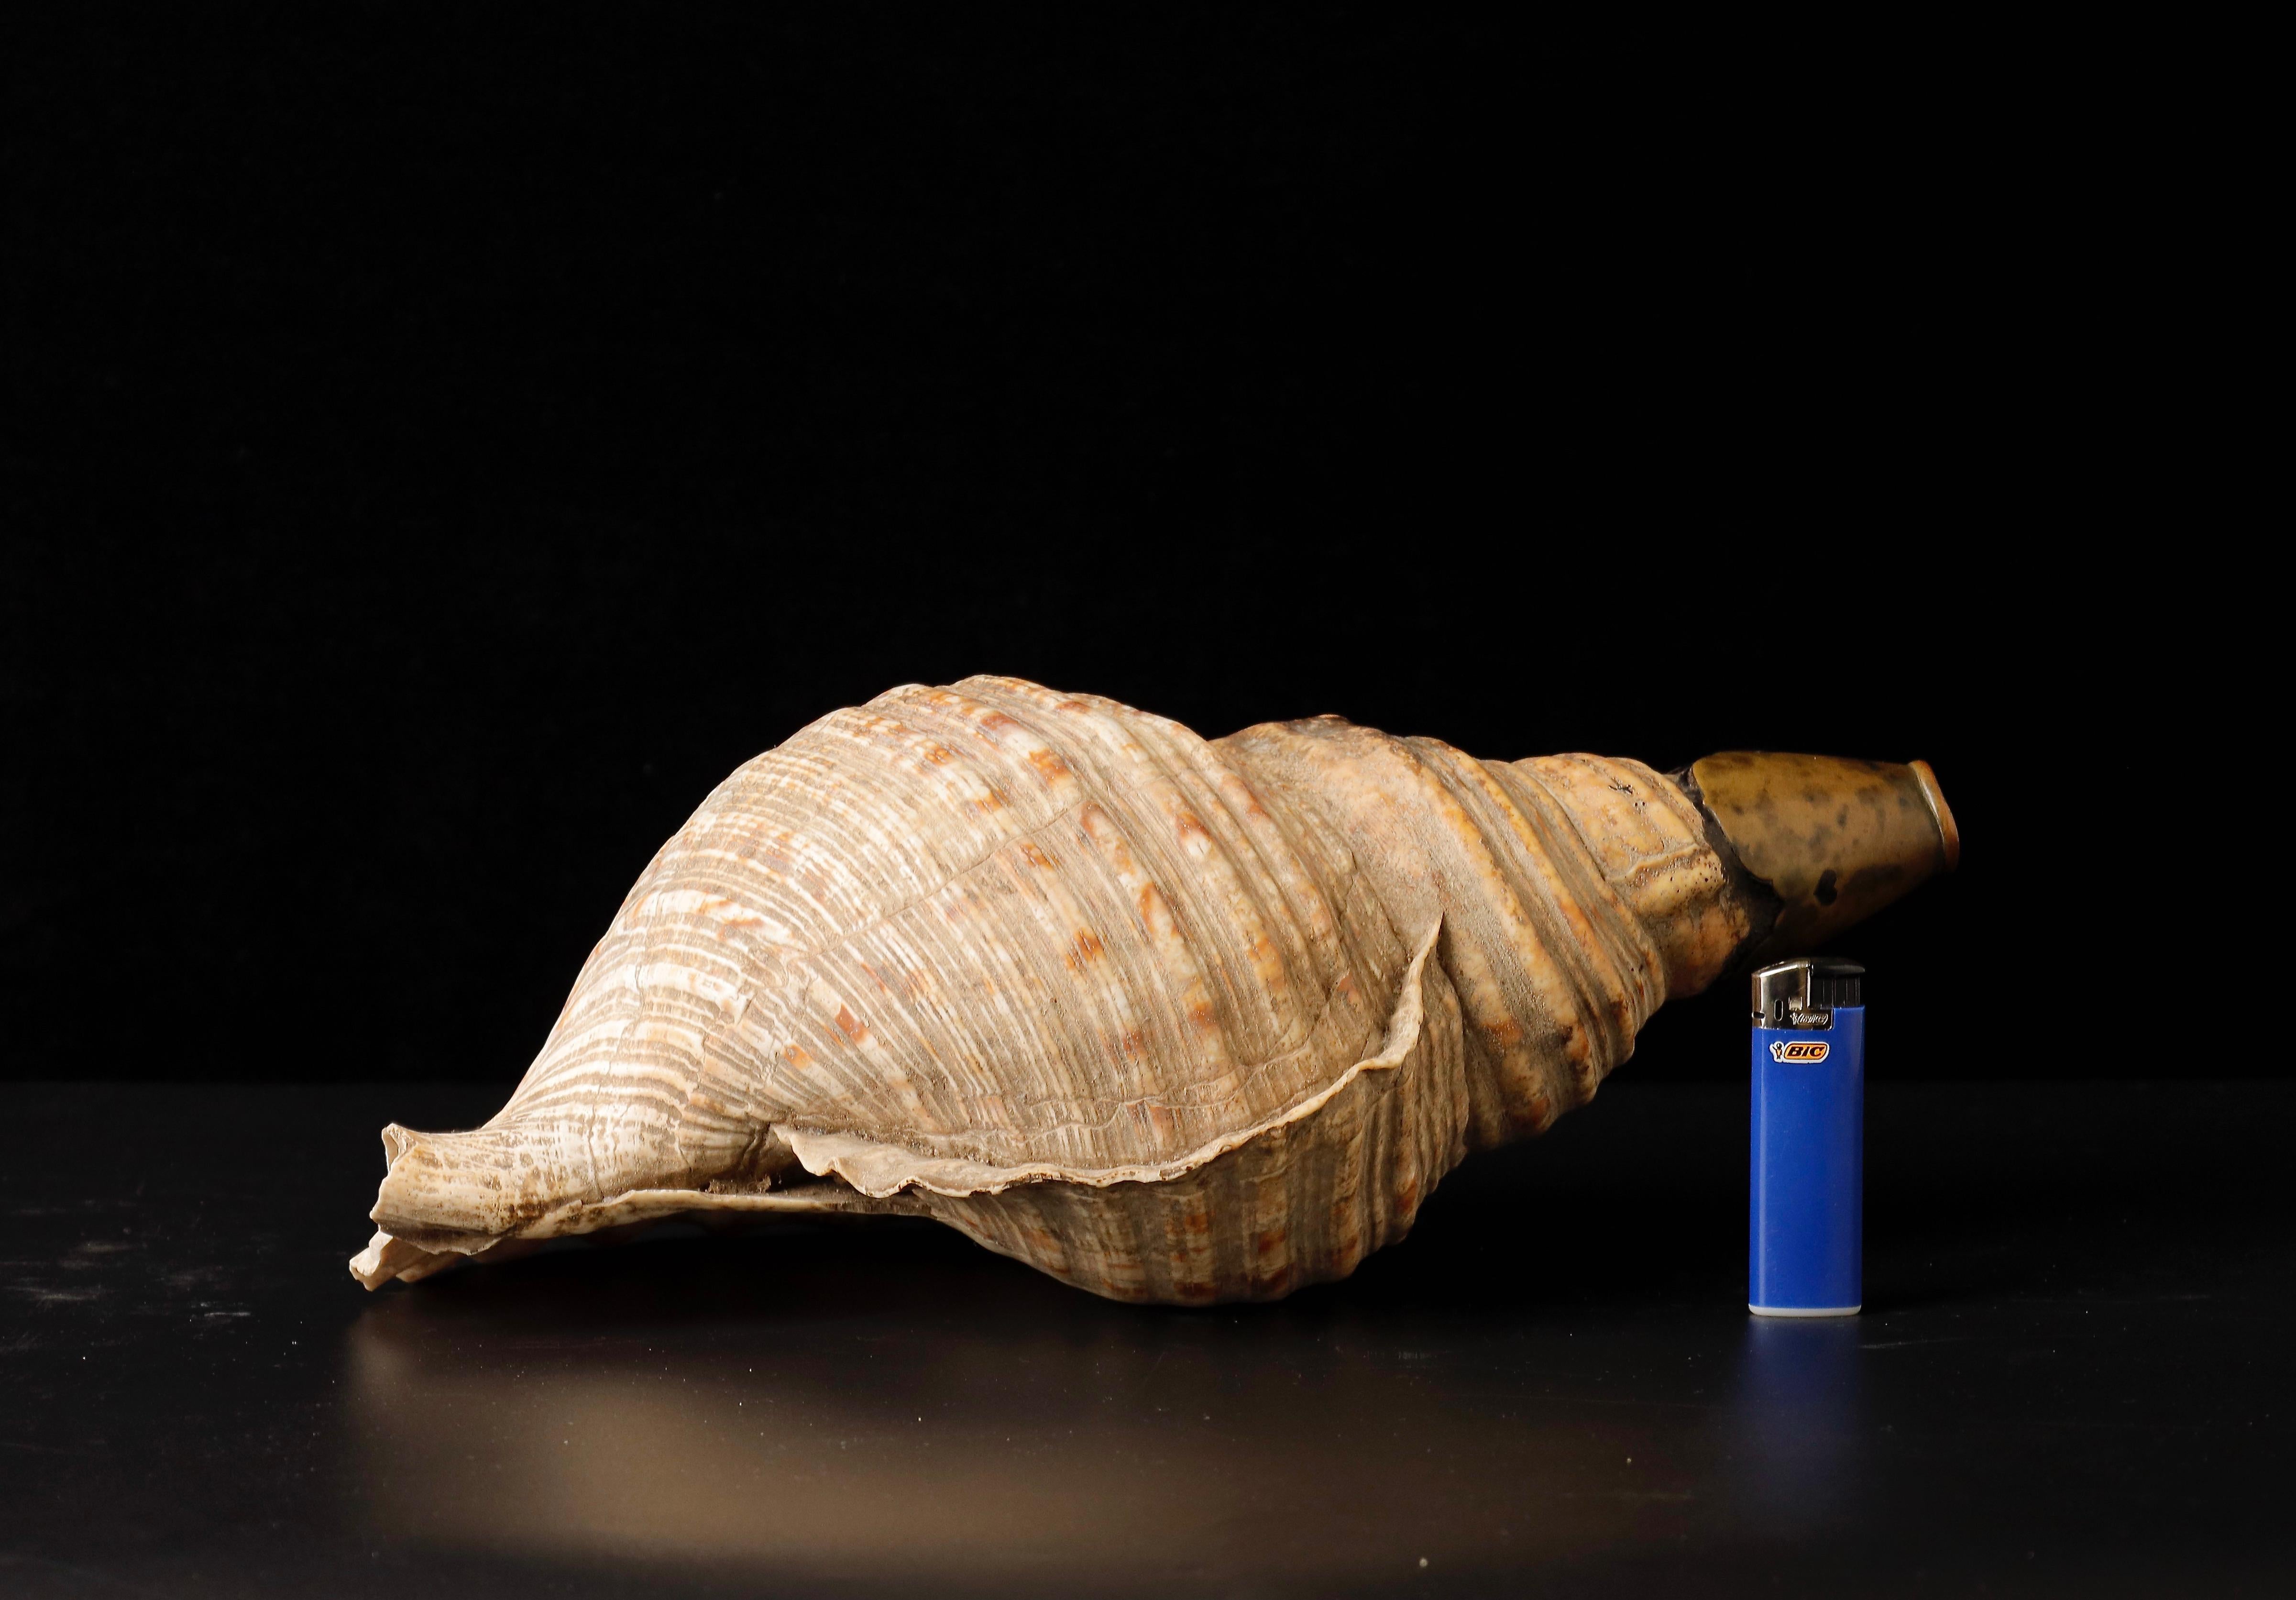 A Rare and Beautiful Edo Period Horagai Conch Shell Trumpet.

This rare and beautiful Horagai conch shell trumpet is a stunning example of Japanese craftsmanship. It is dated to the Edo period, 18th century, and is in fine original condition with